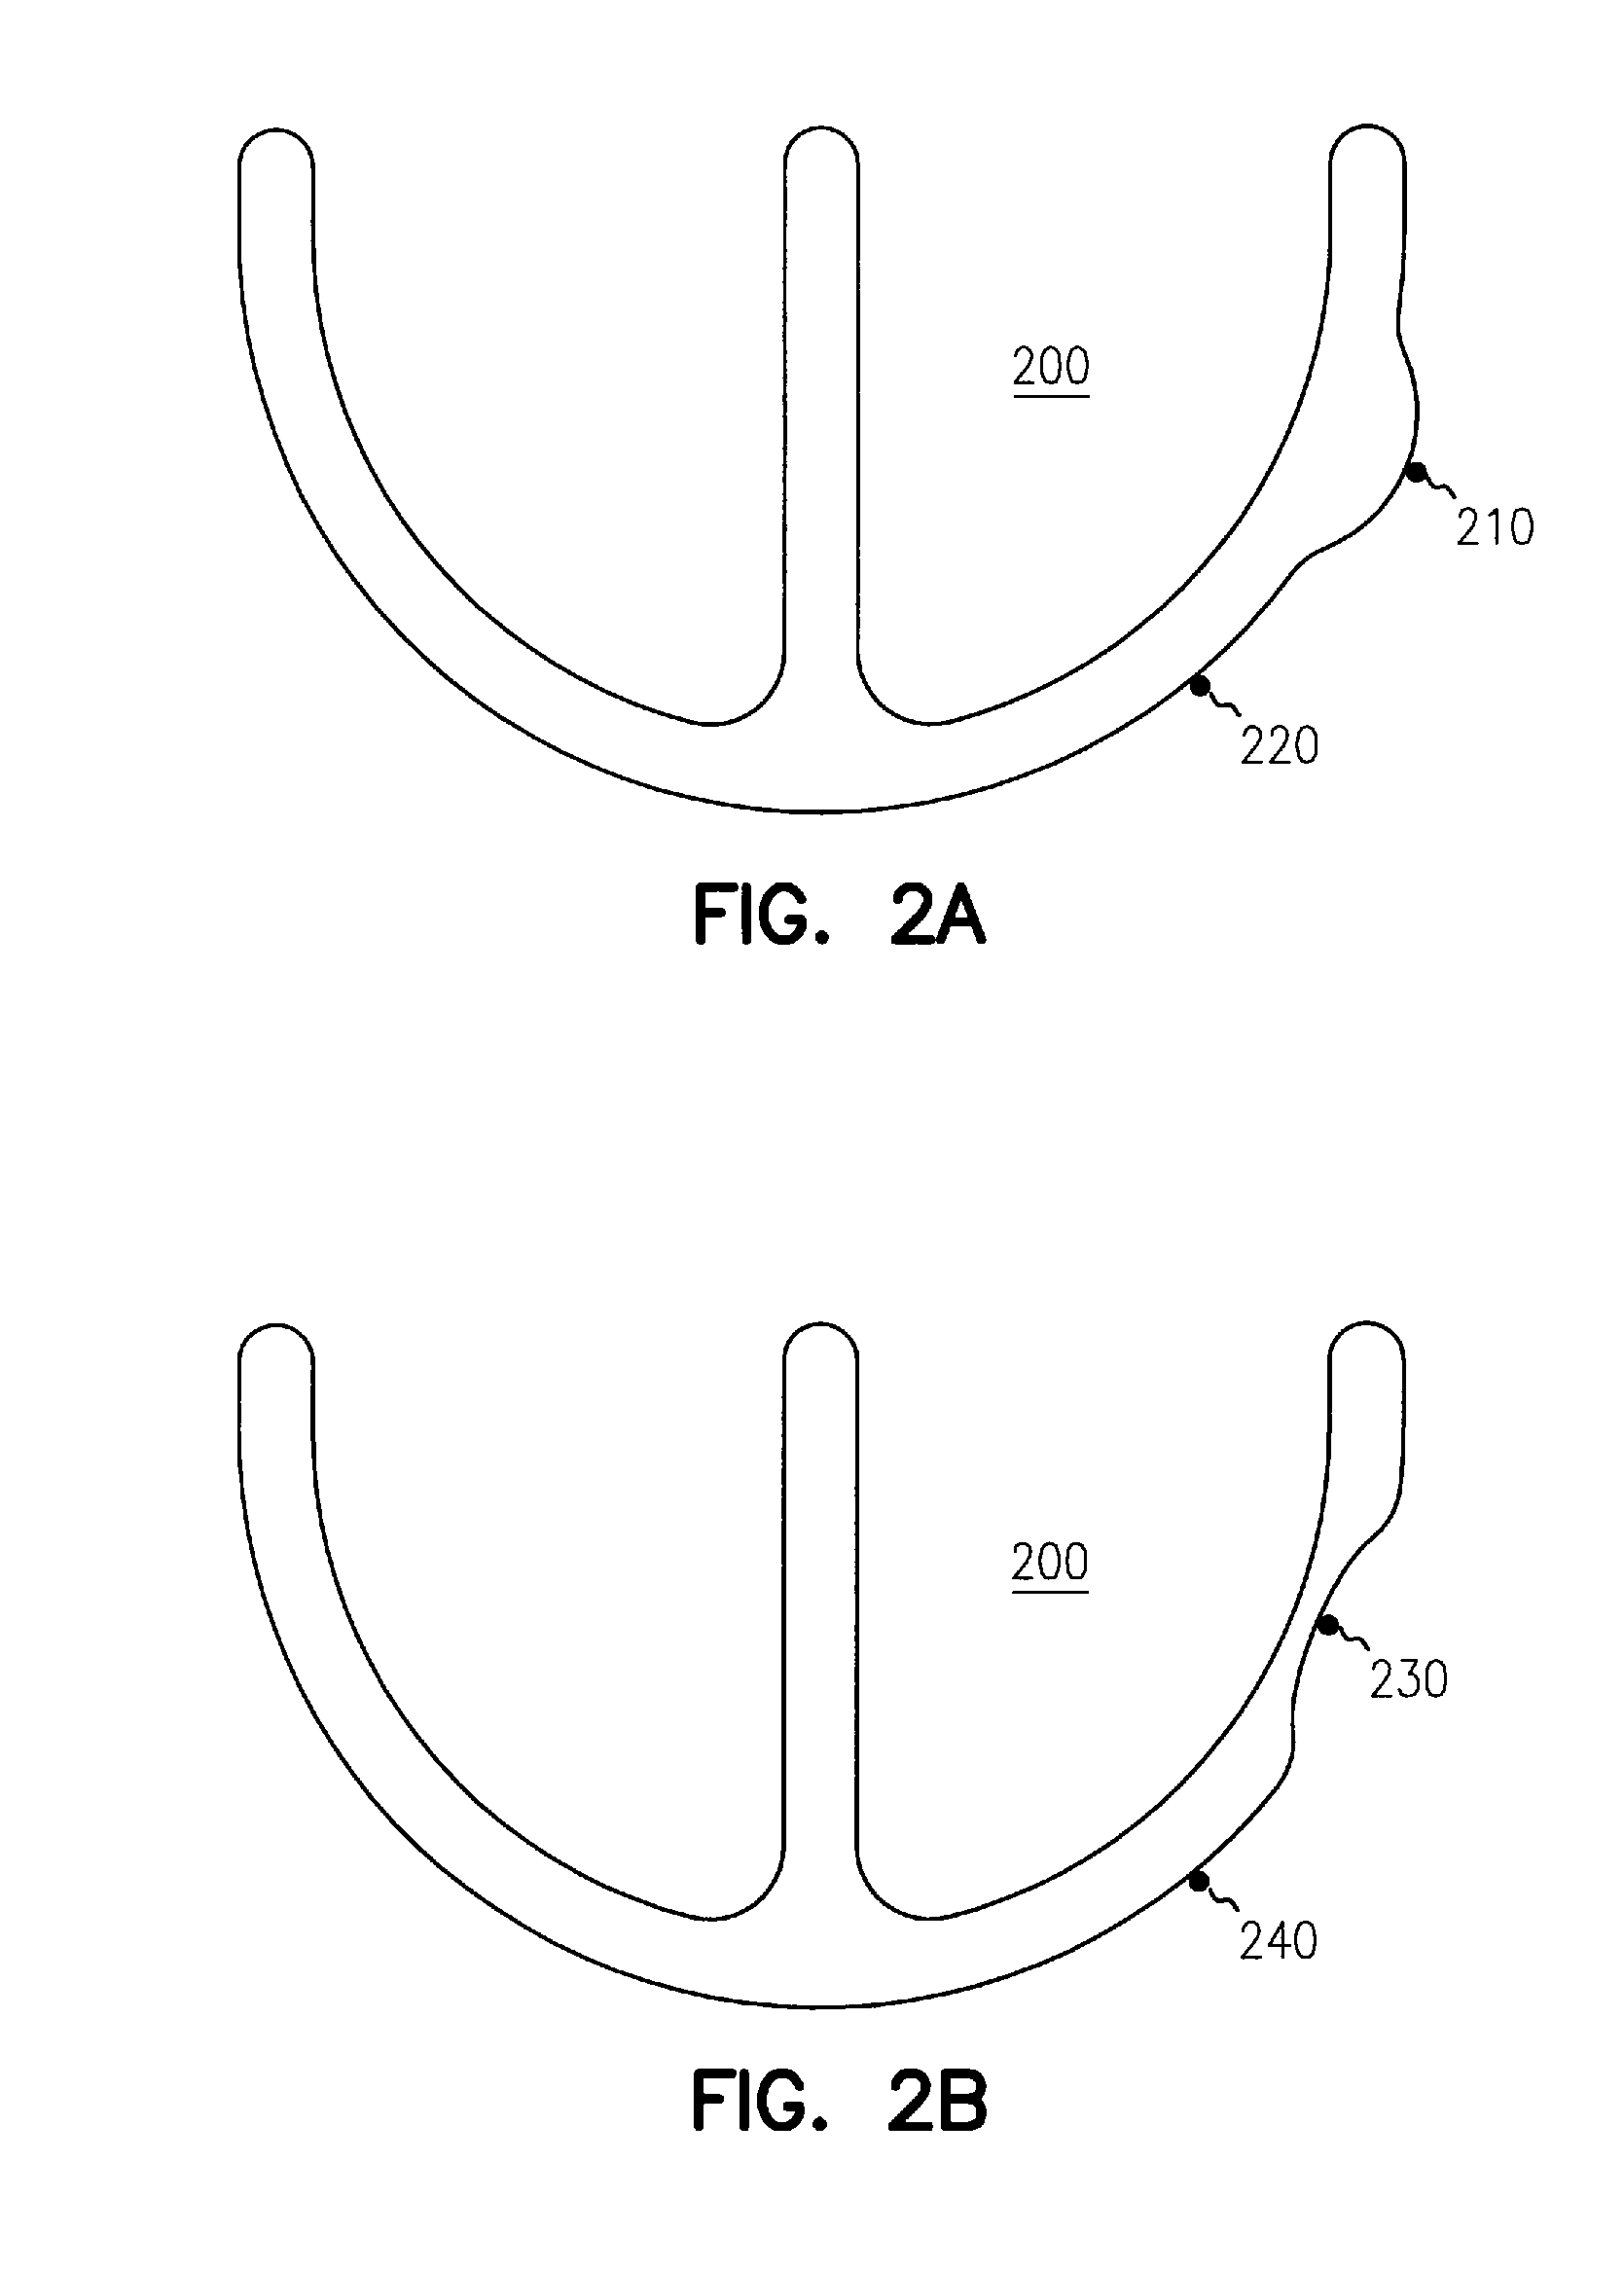 Apparatus and method for reversal of myocardial remodeling with electrical stimulation